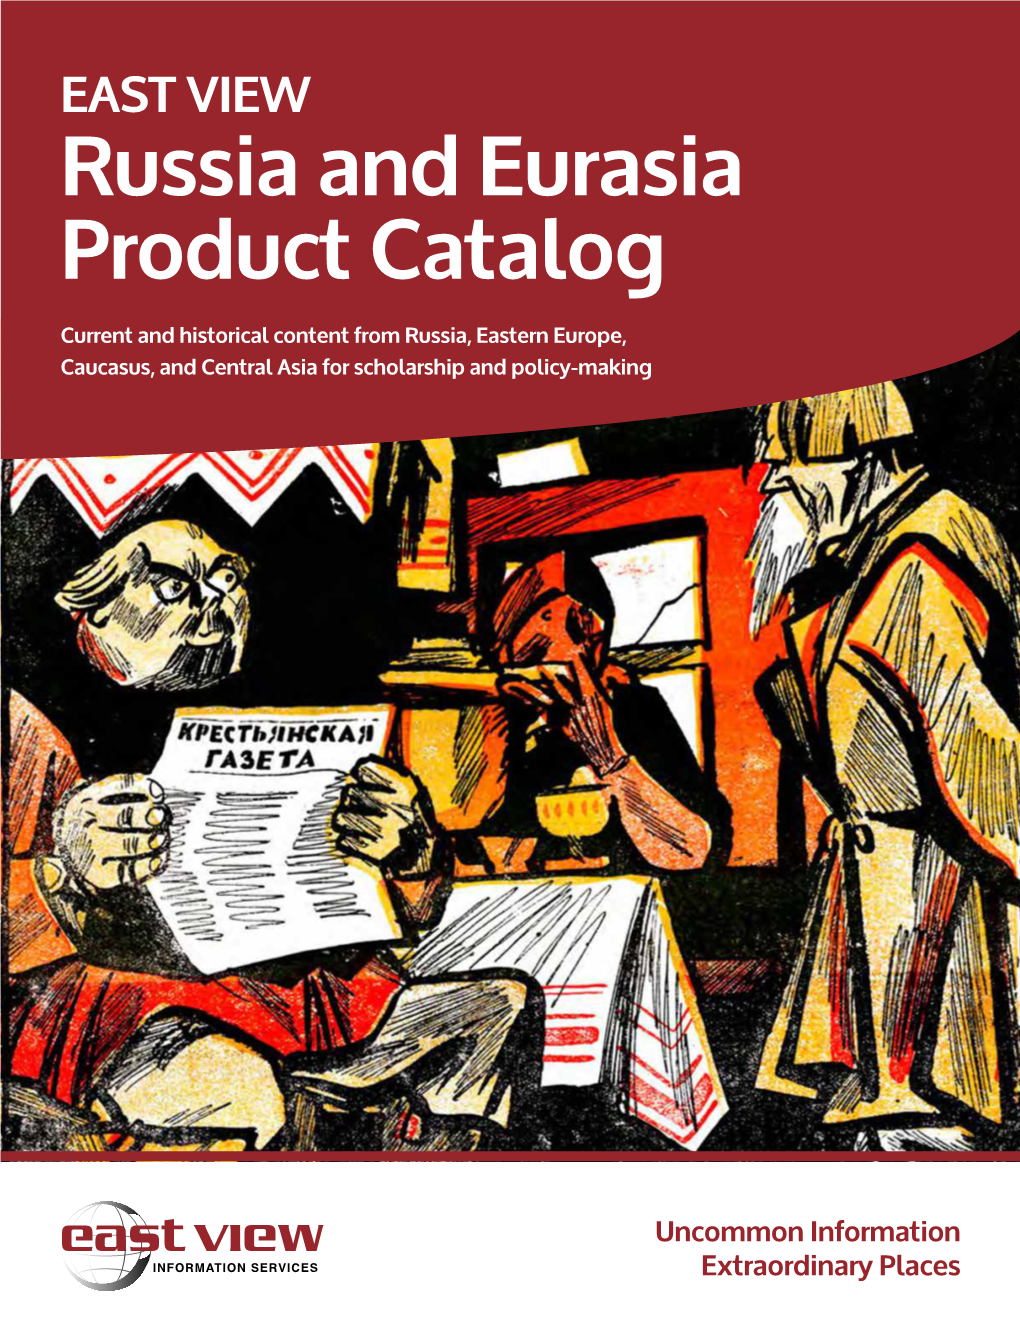 EAST VIEW Russia and Eurasia Product Catalog